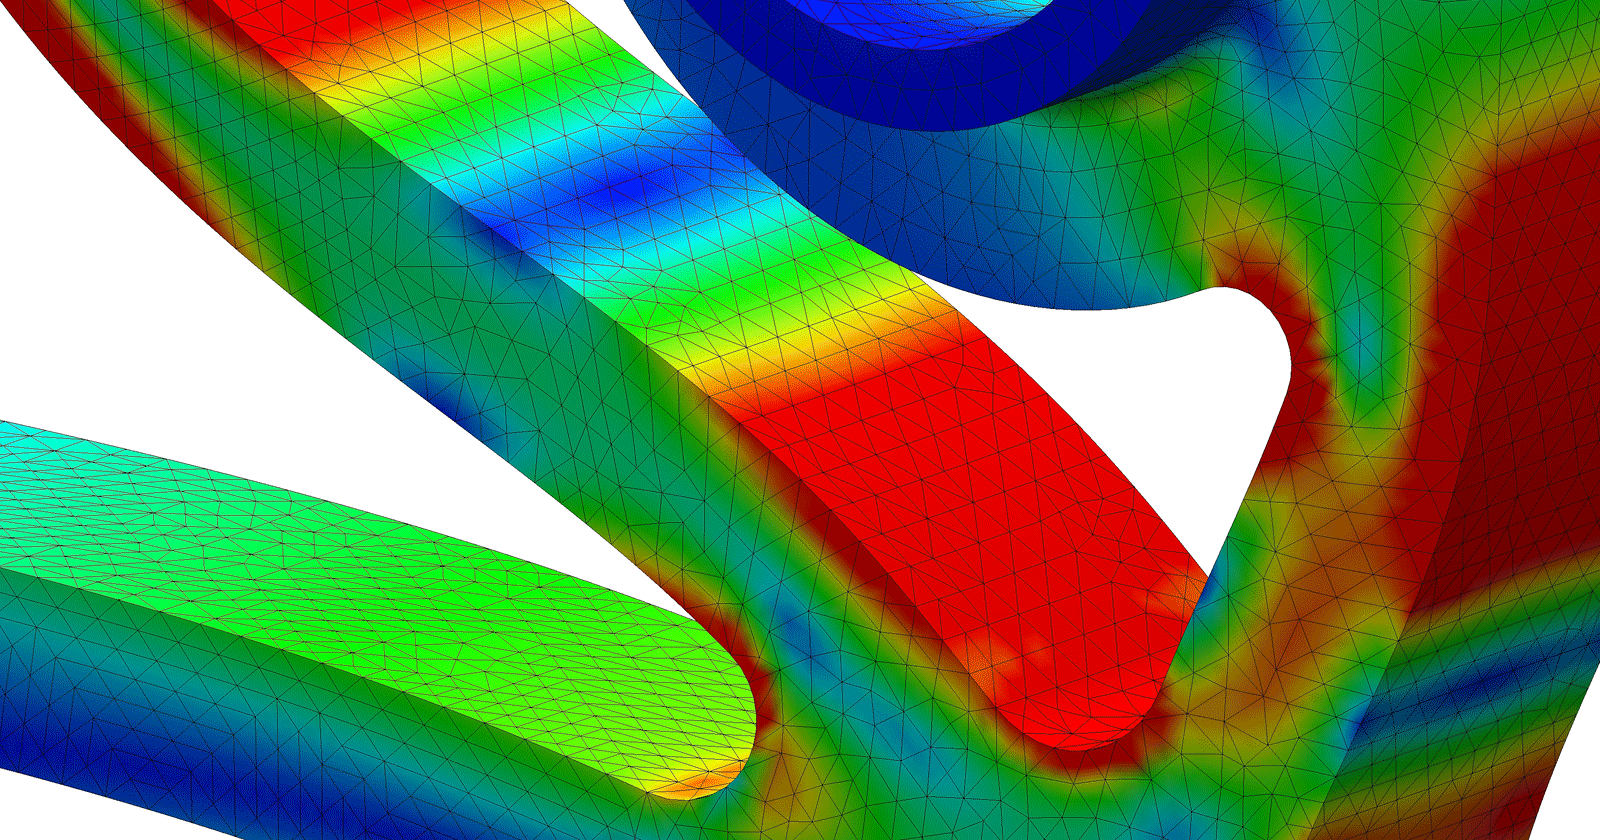 Exponent employs Finite Element Analysis, FEA, to analyze medical devices.